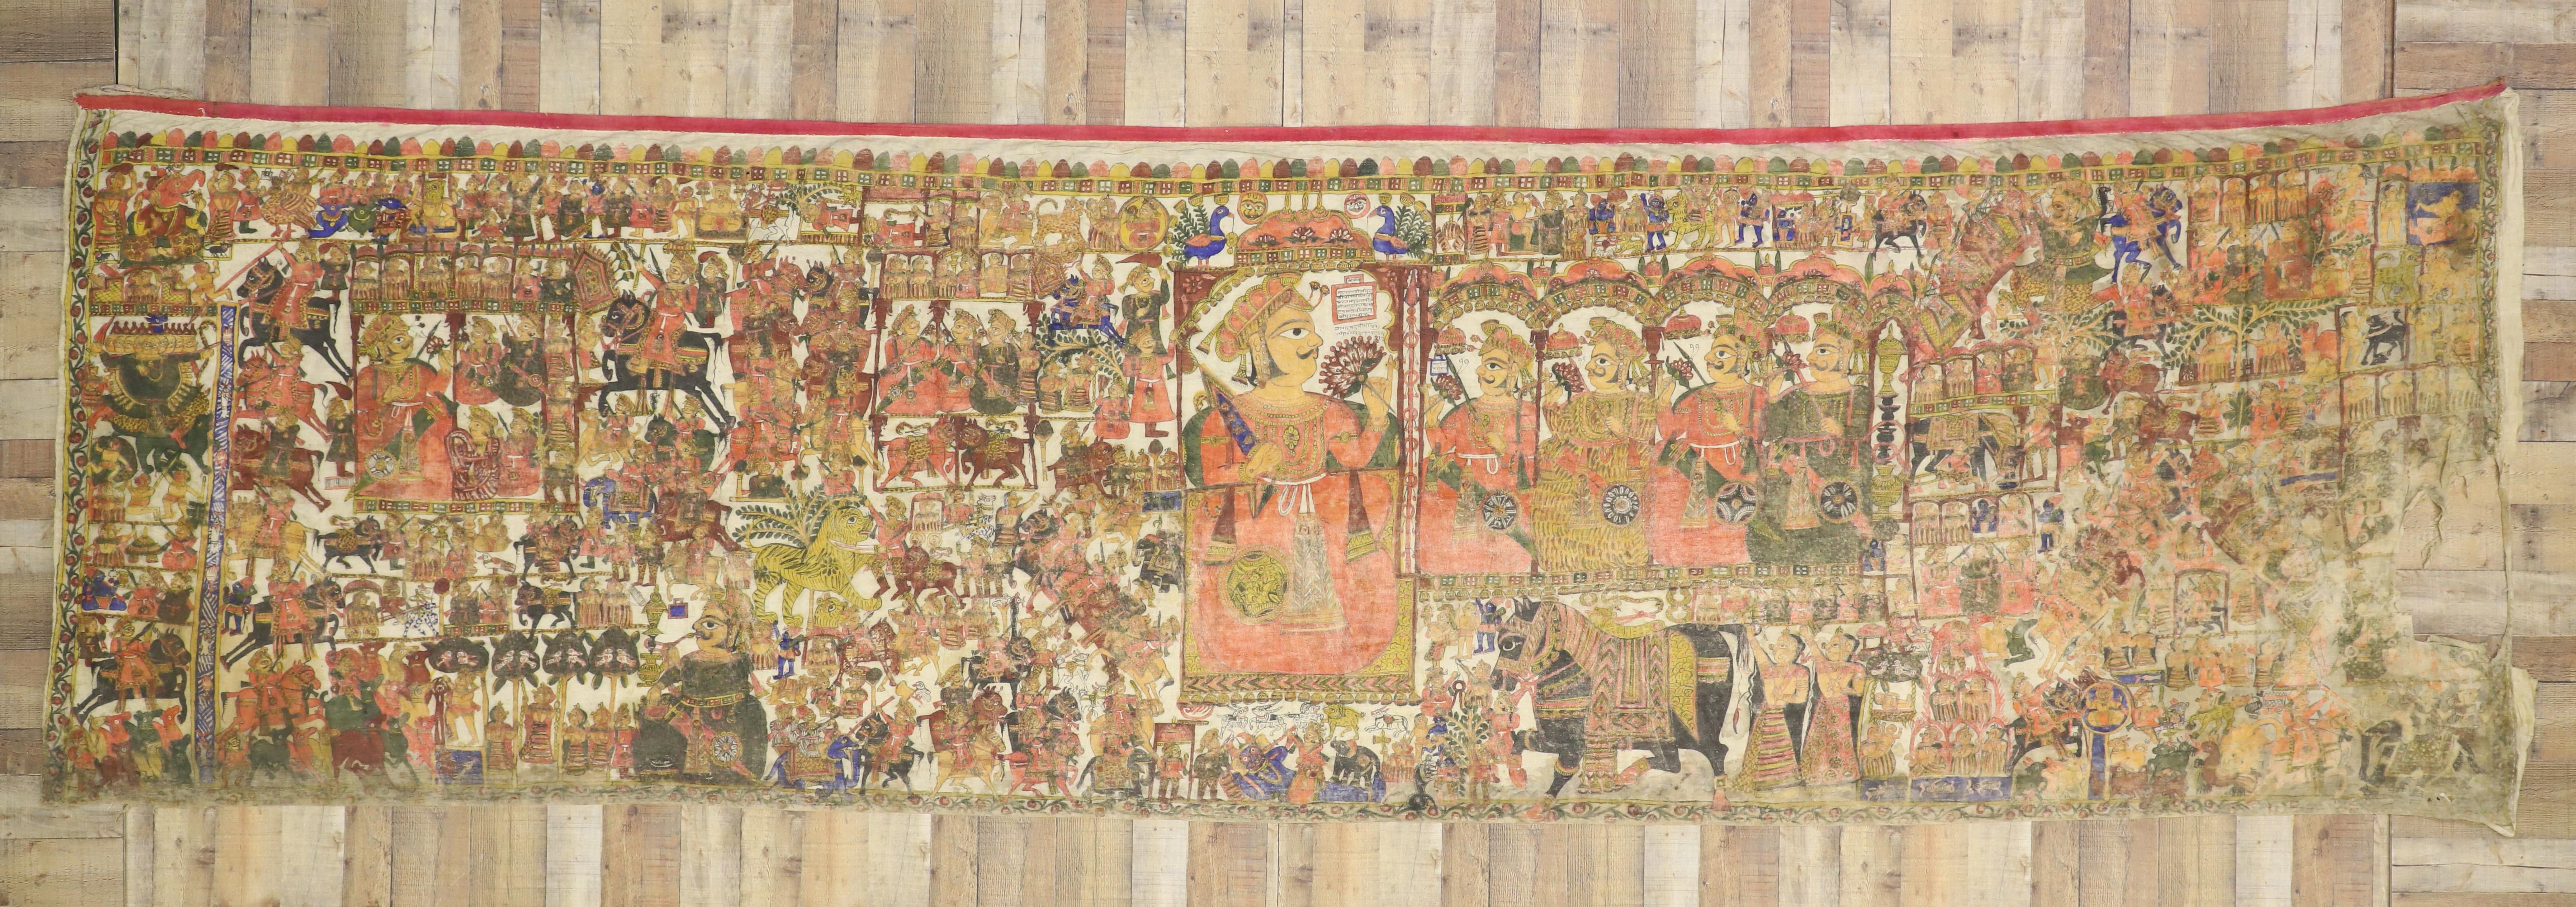 74417 18th Century Antique Indian Medieval Wall Tapestry after the Battle of Karnal in 1739.  This beautiful antique Indian painted tapestry is done on a canvas. It features a hunting battle scene with kings, kingsmen and royalty with multiple types